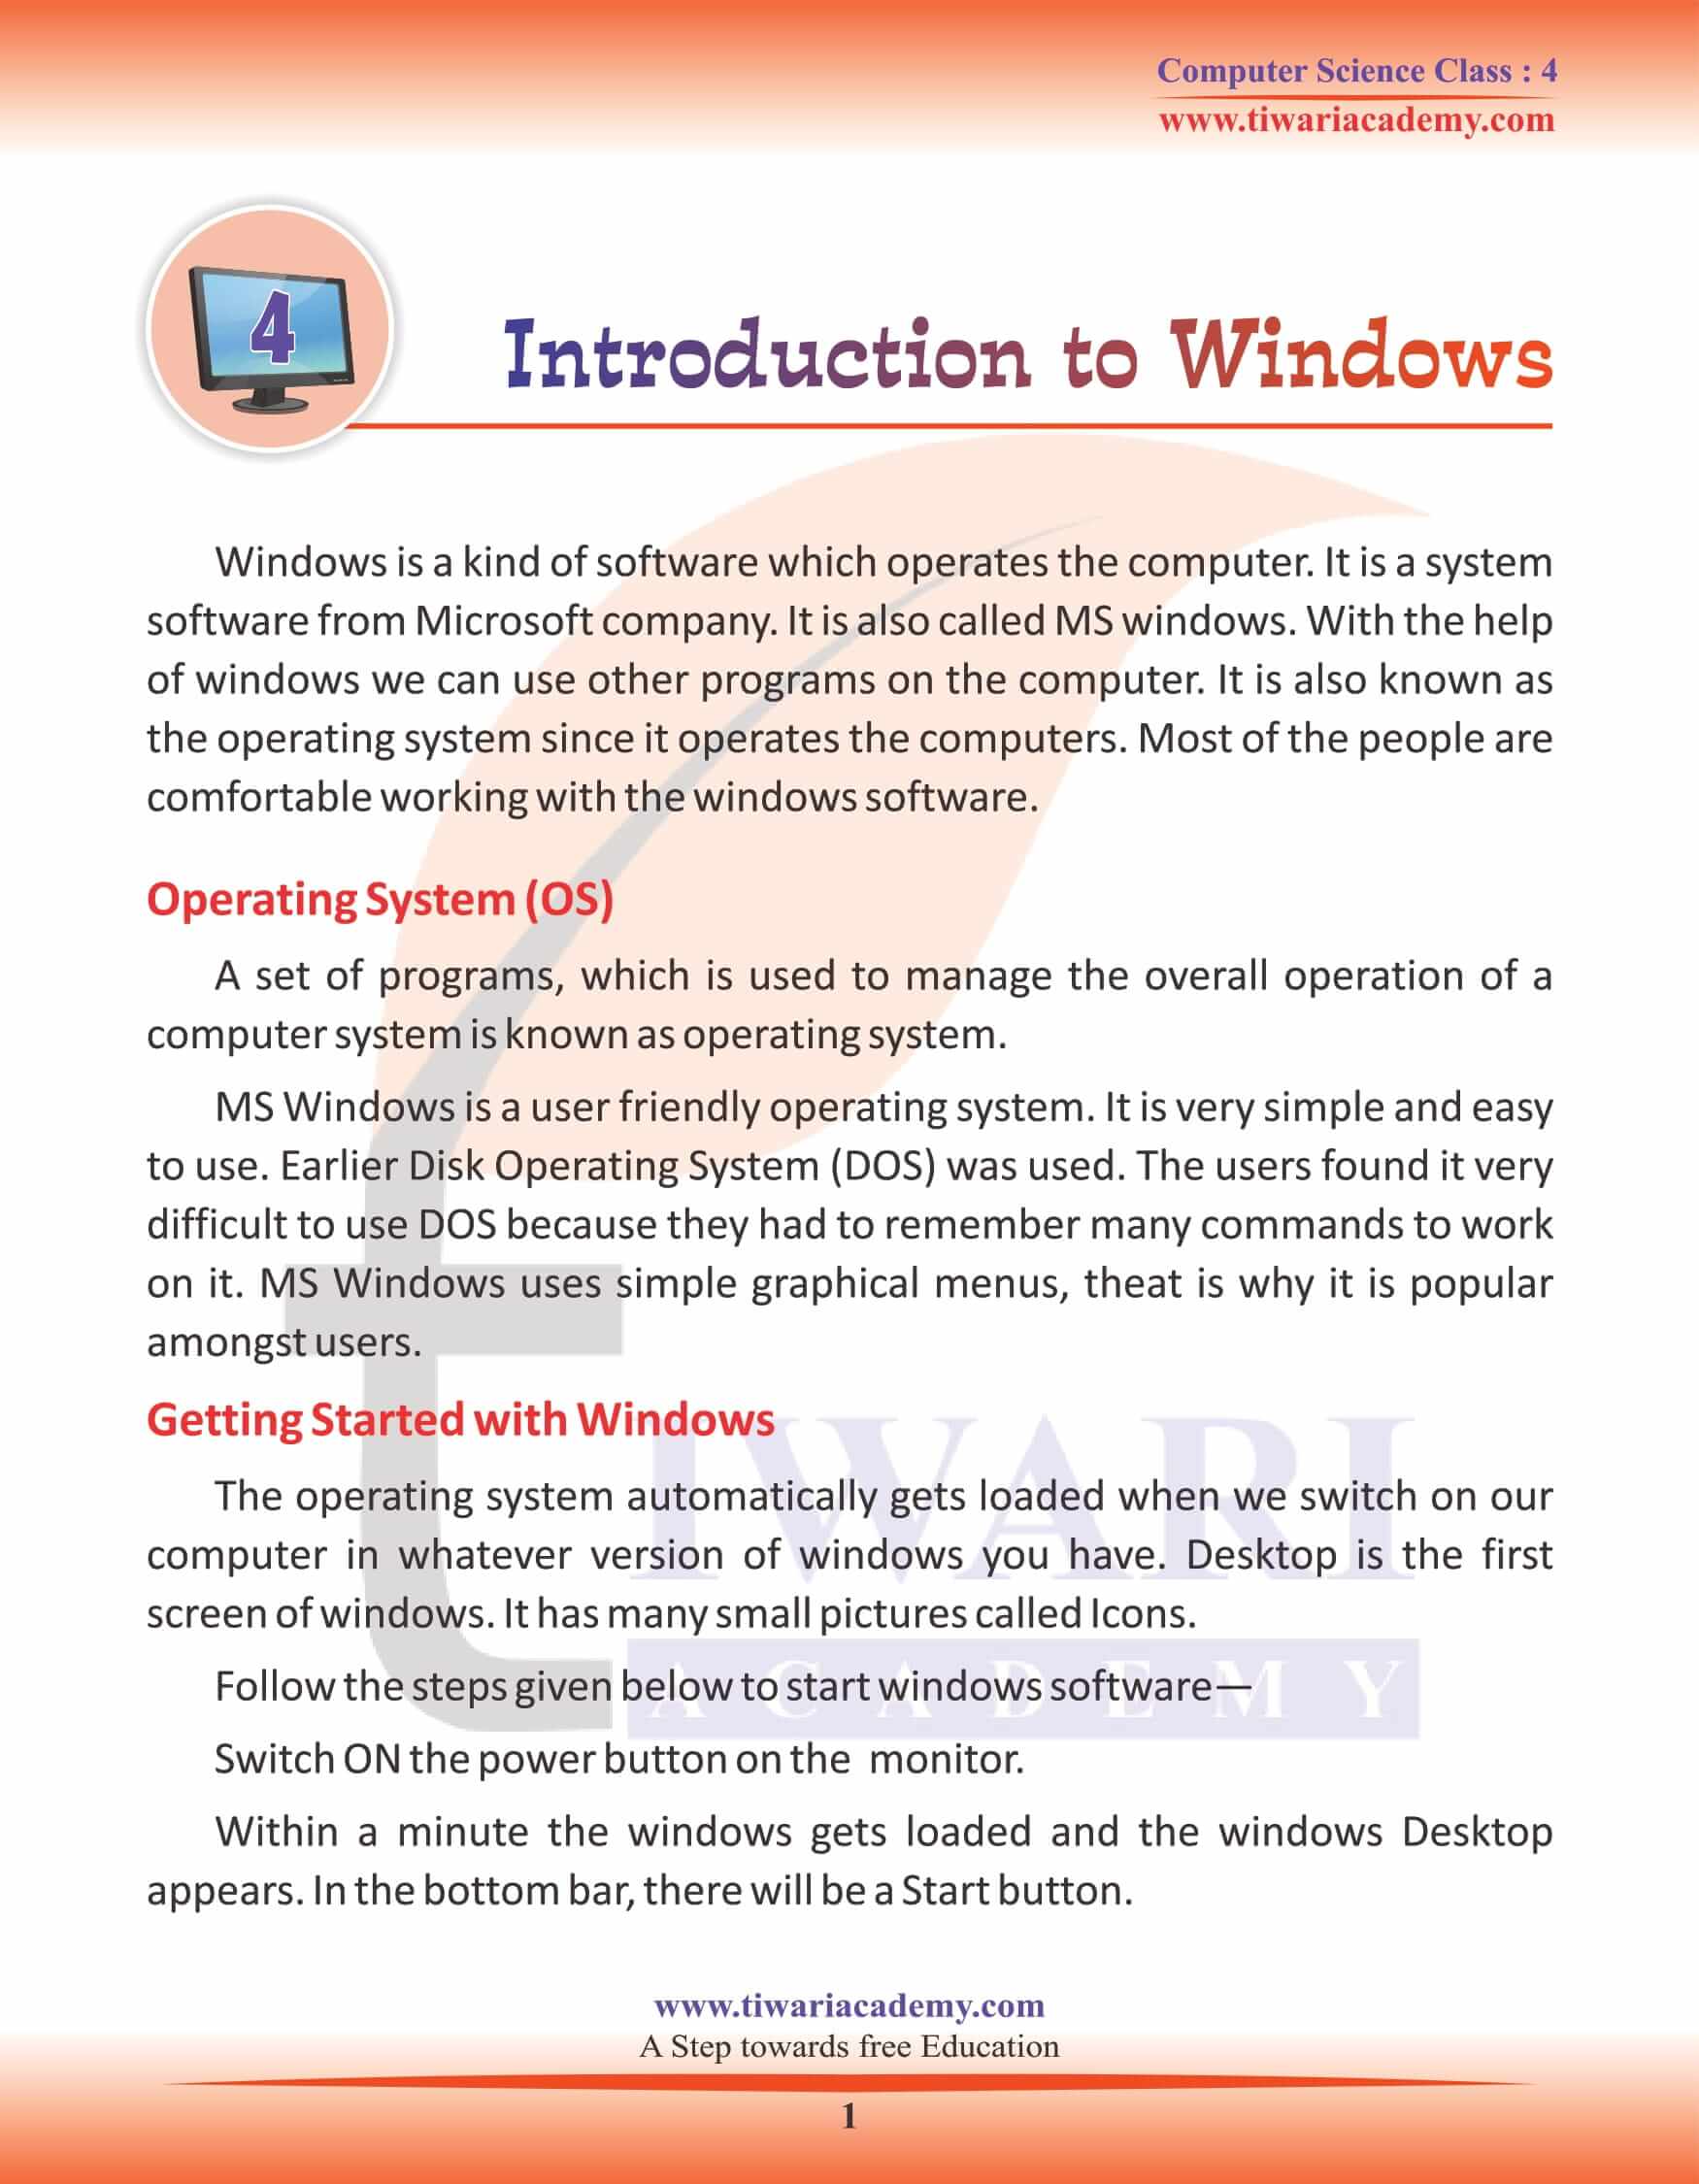 Class 4 Computer Science Chapter 4 Introduction to Windows